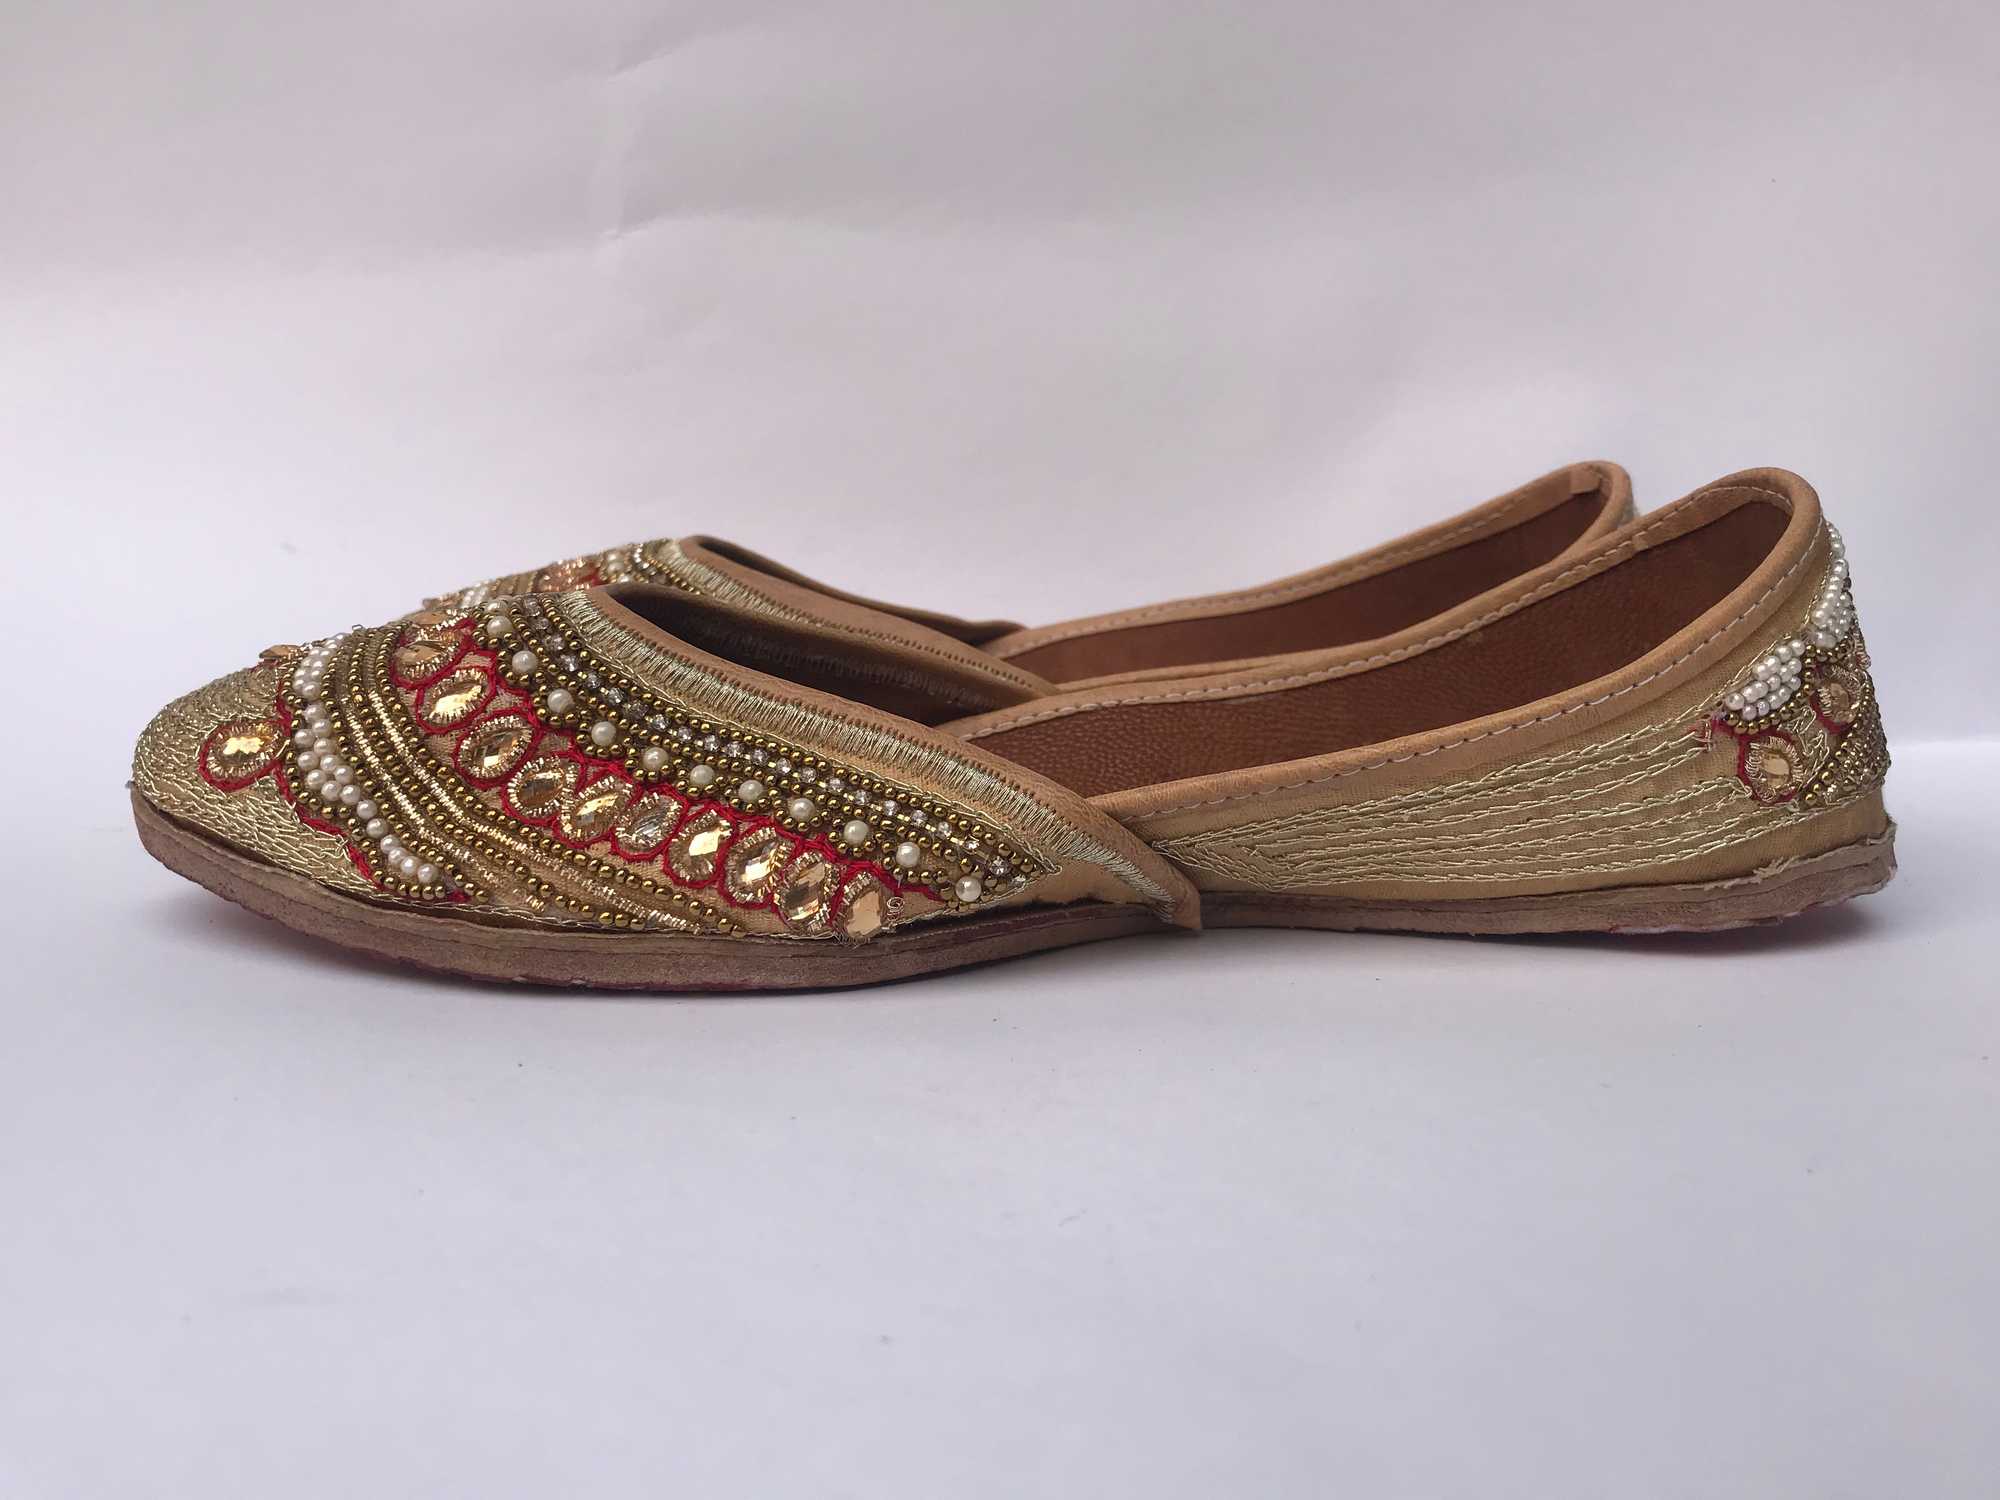 Nepali Handmade Sandals, With Leather And Bead Design